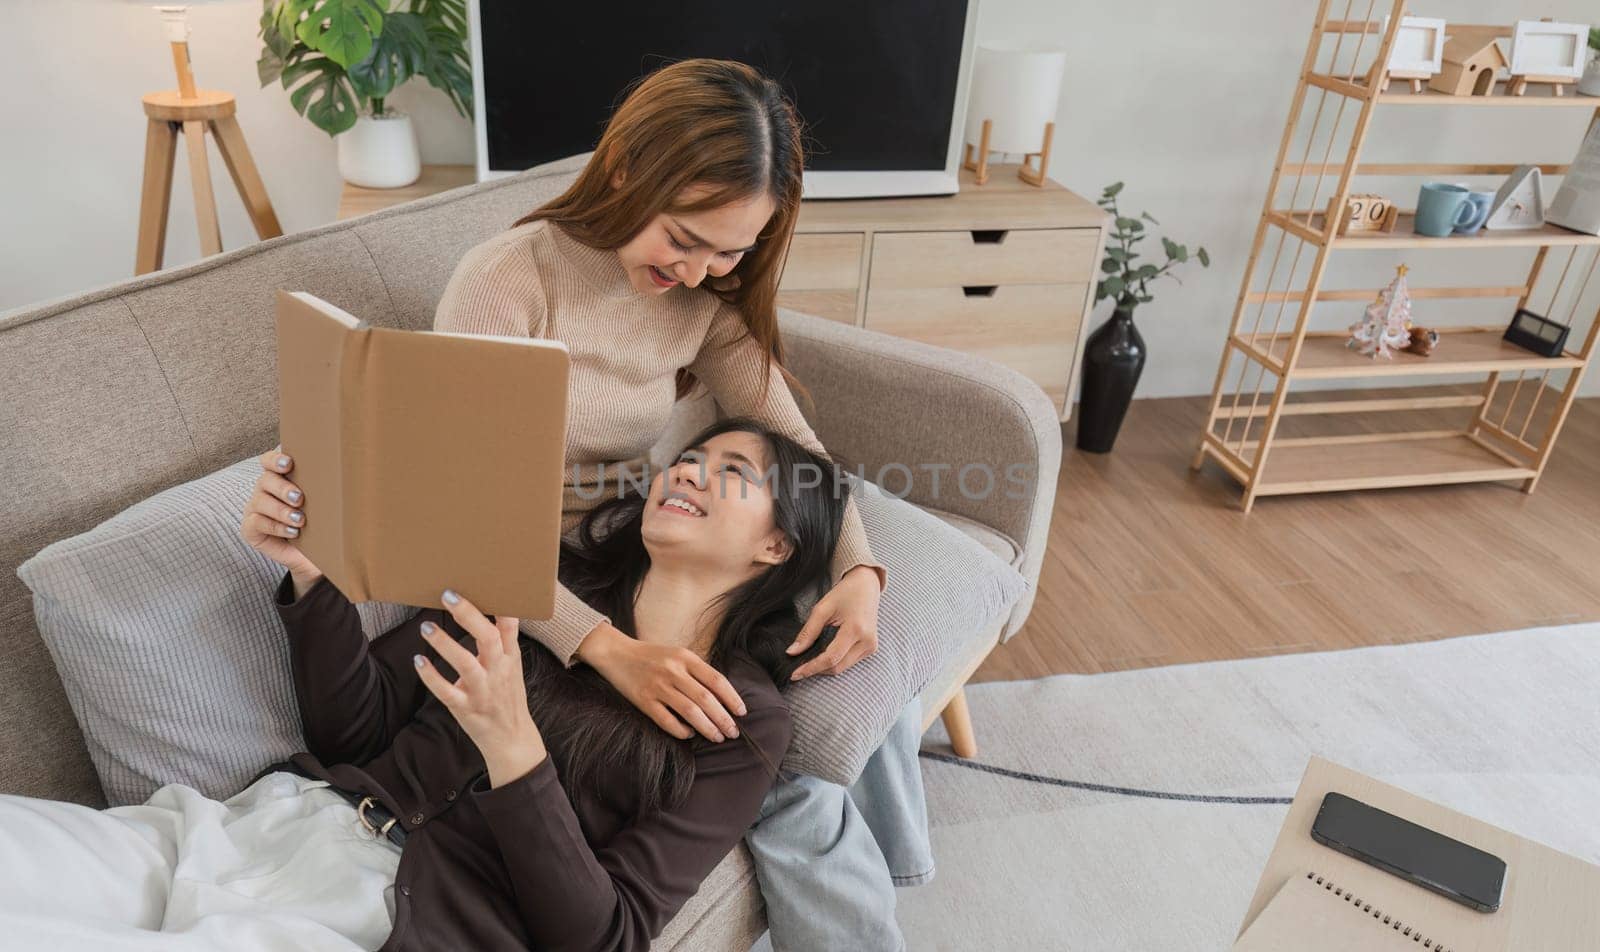 Happy lesbian couple sitting together in a cozy living room, sharing a moment of relaxation and bonding over a book.